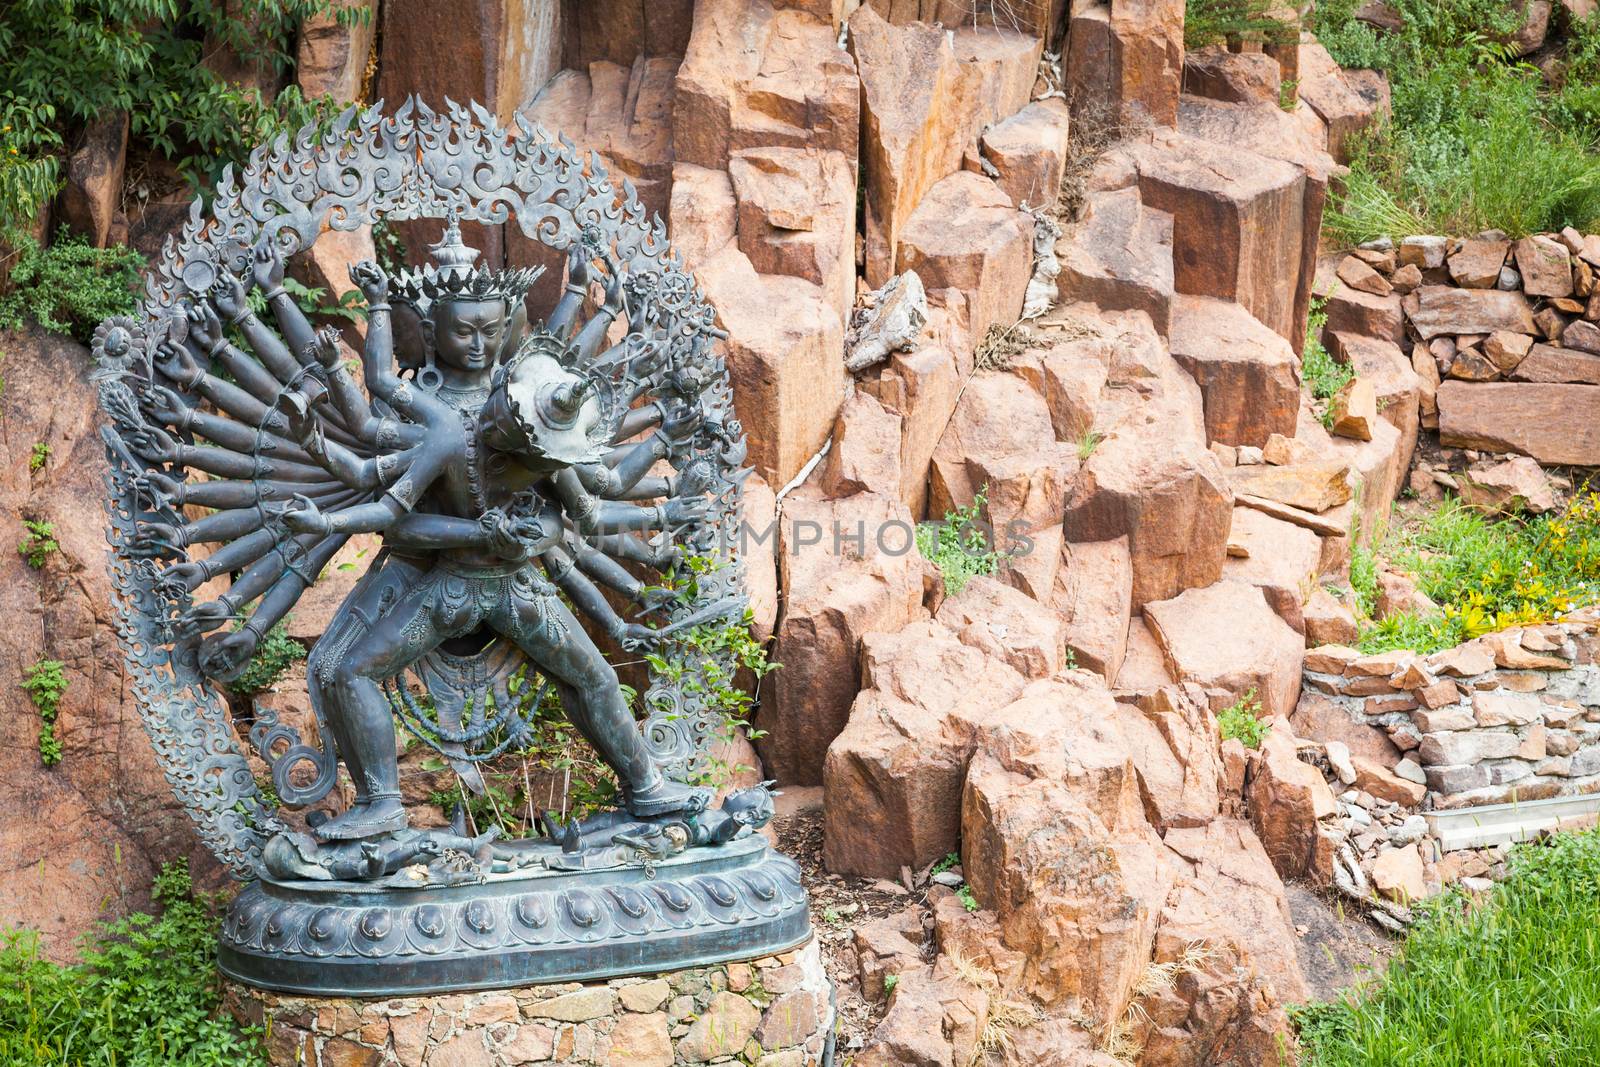 Tantric Deities statue in Ritual Embrace located in a mountain g by Perseomedusa